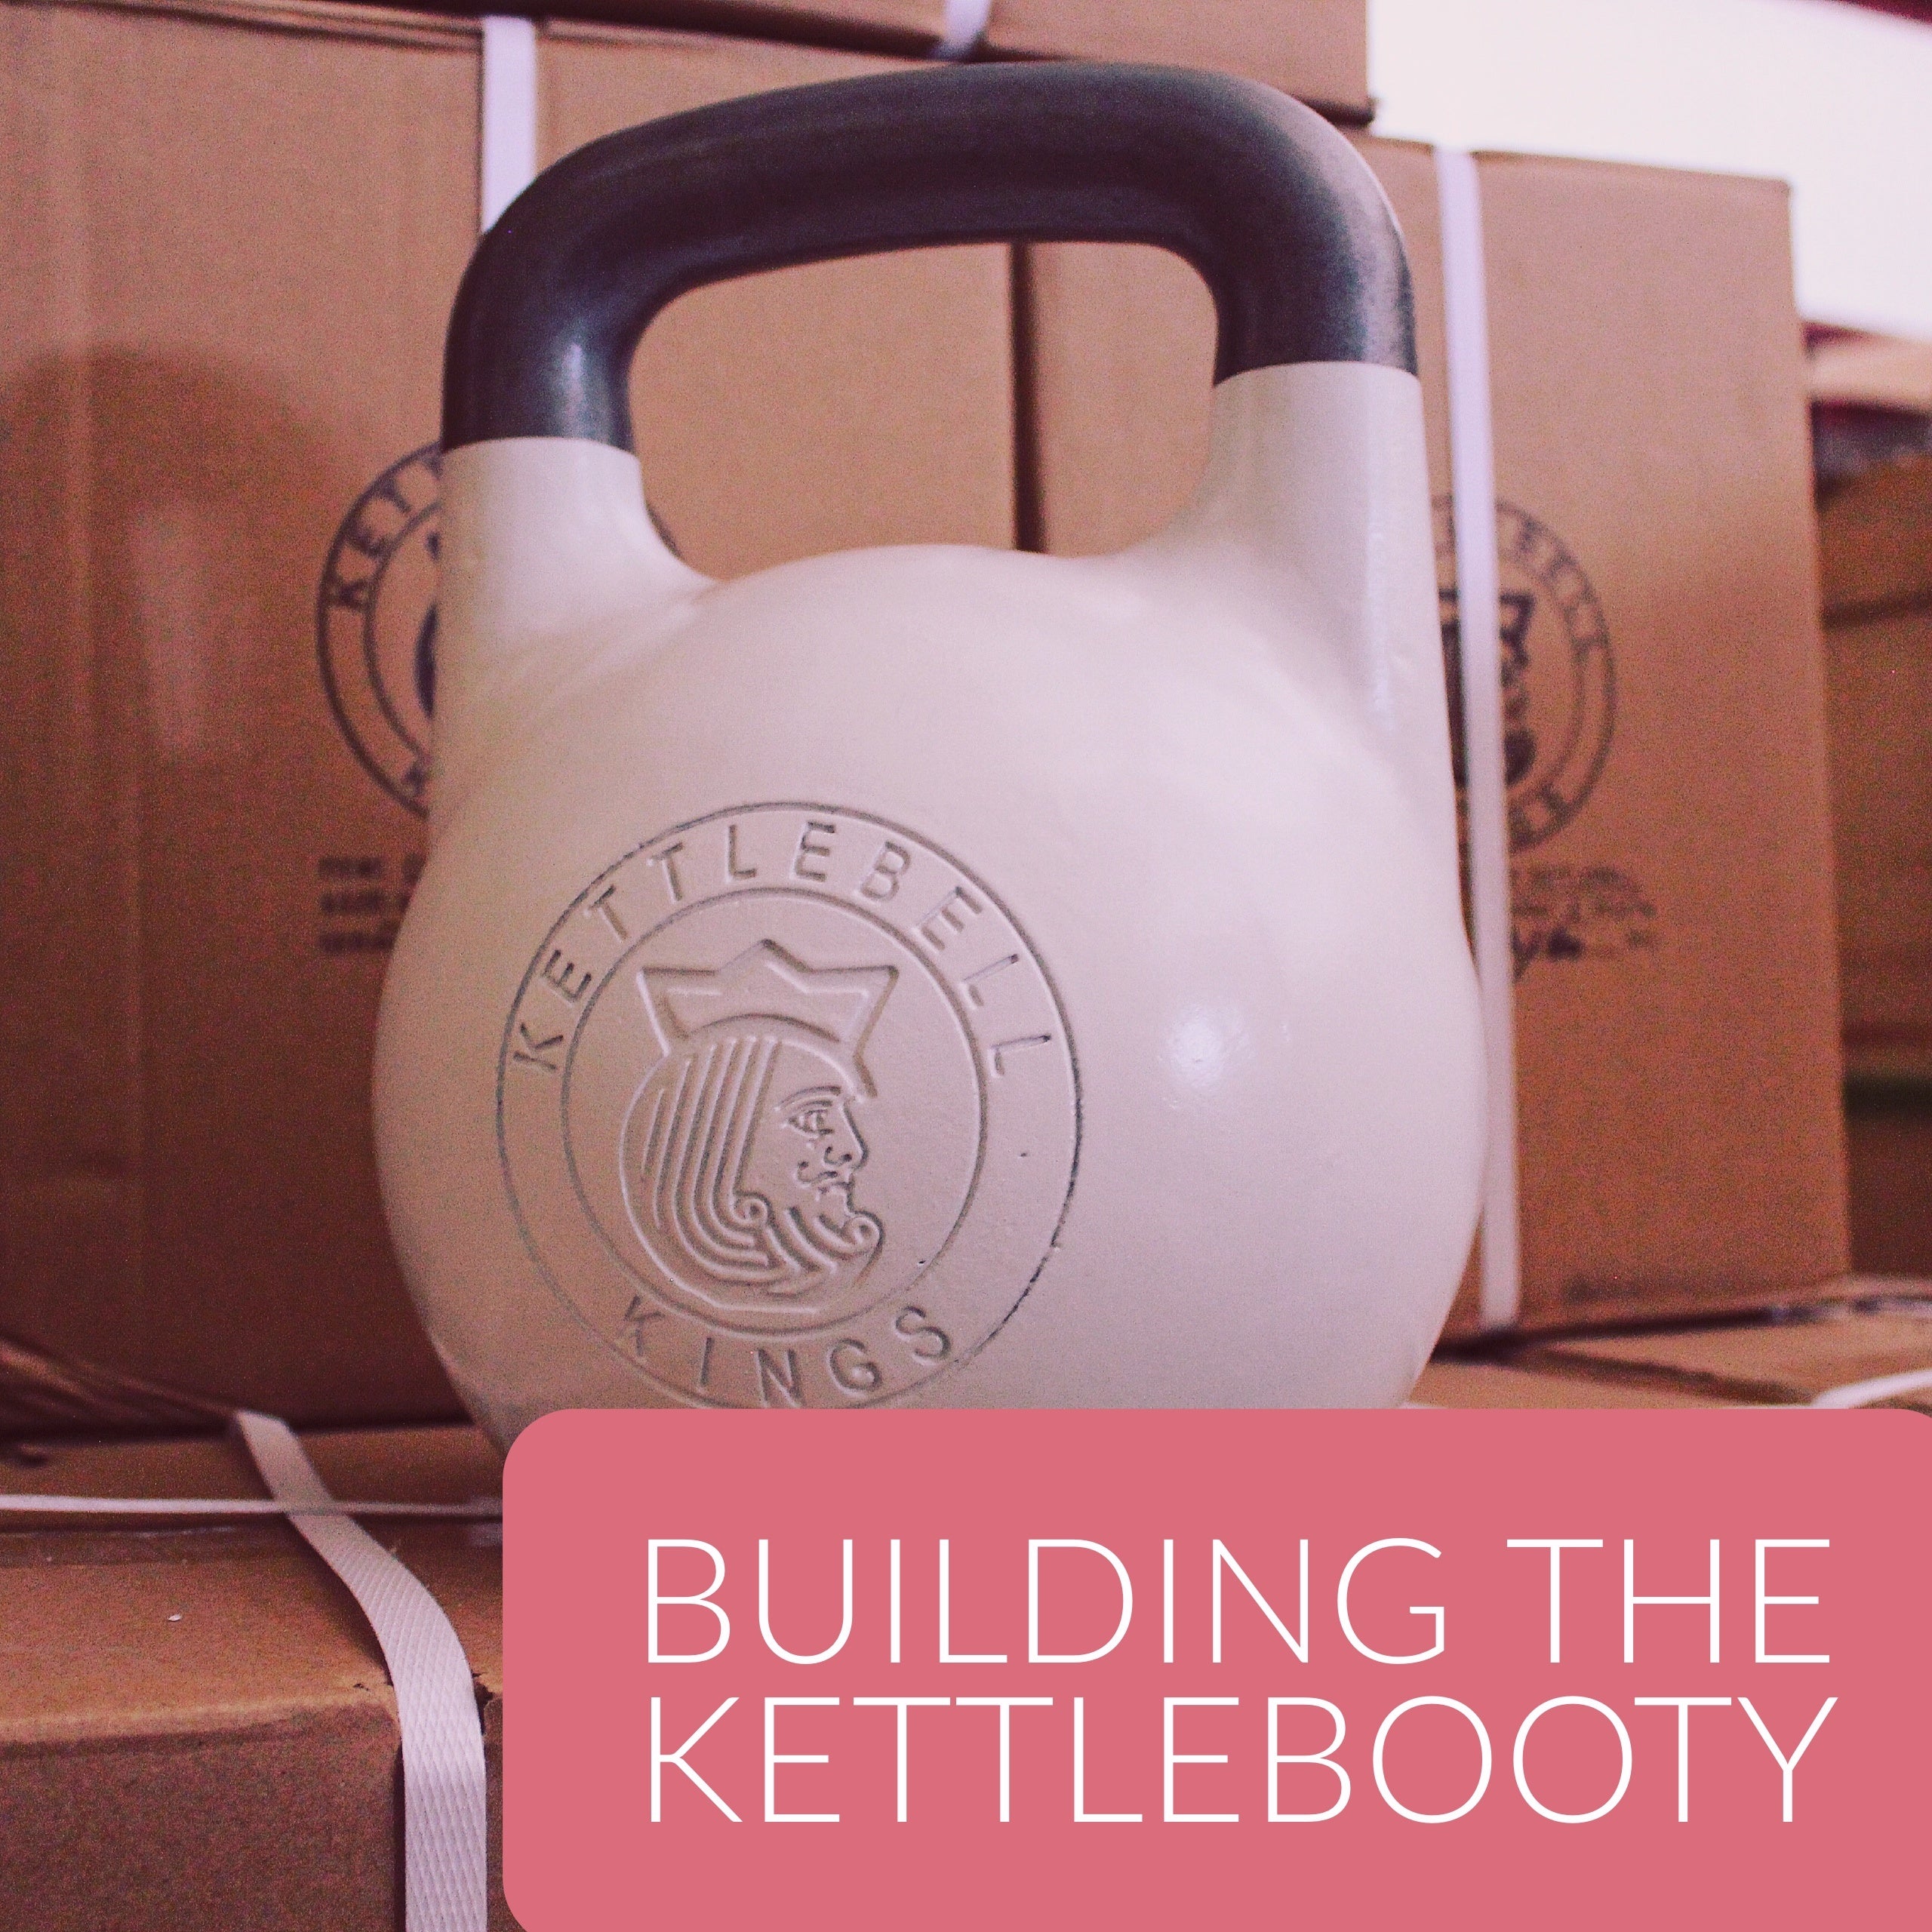 Build The Kettlebooty: Part 1